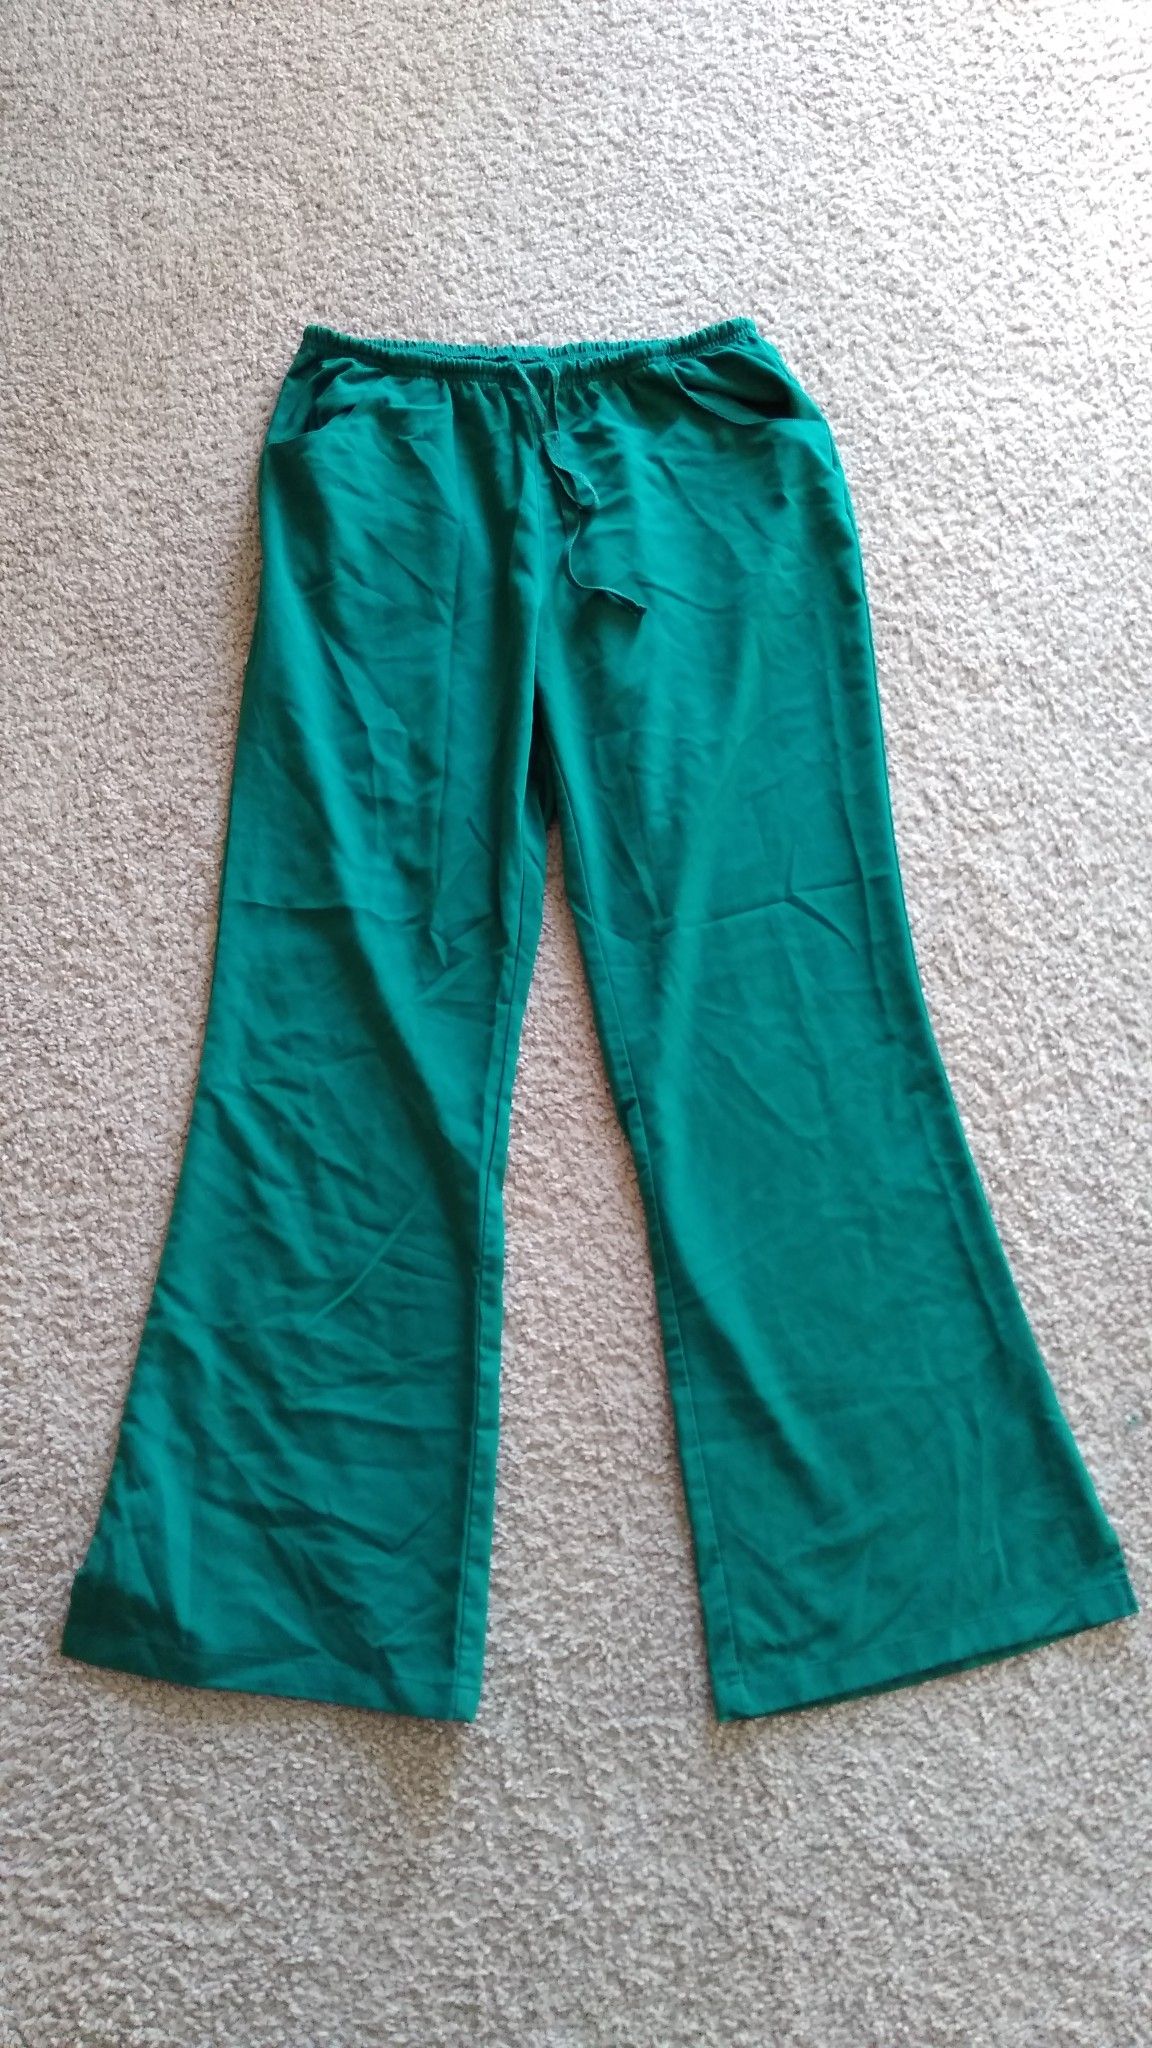 Dickies Scrub Pants , women's size M. ( Excellent condition )